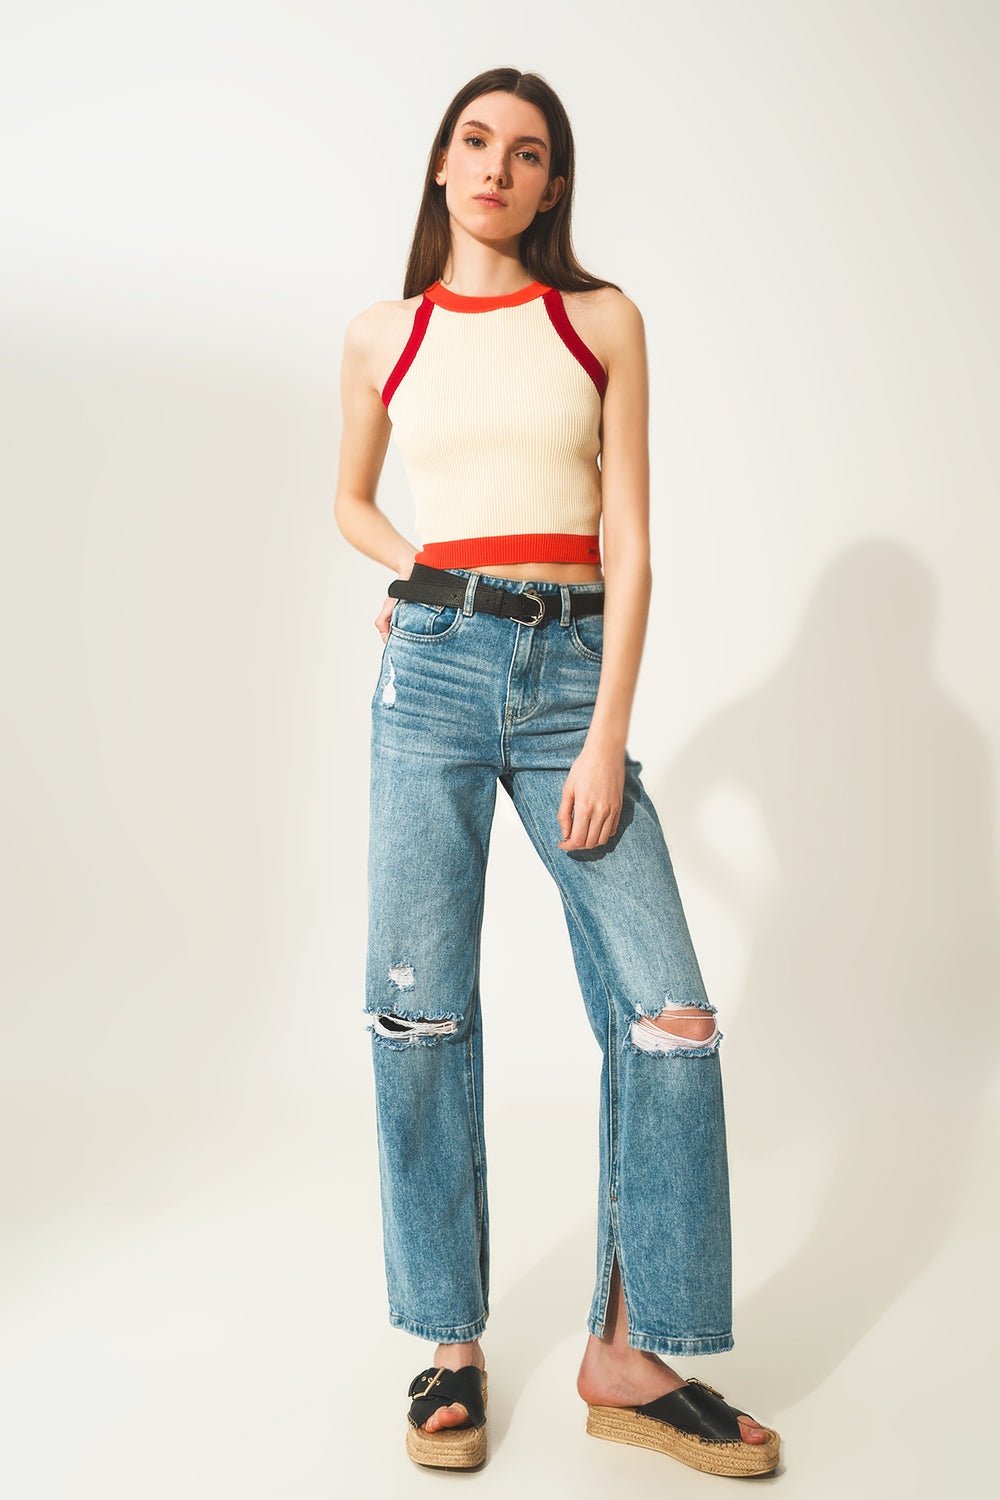 Ribbed Cropped Vest Top in Red - Mack & Harvie